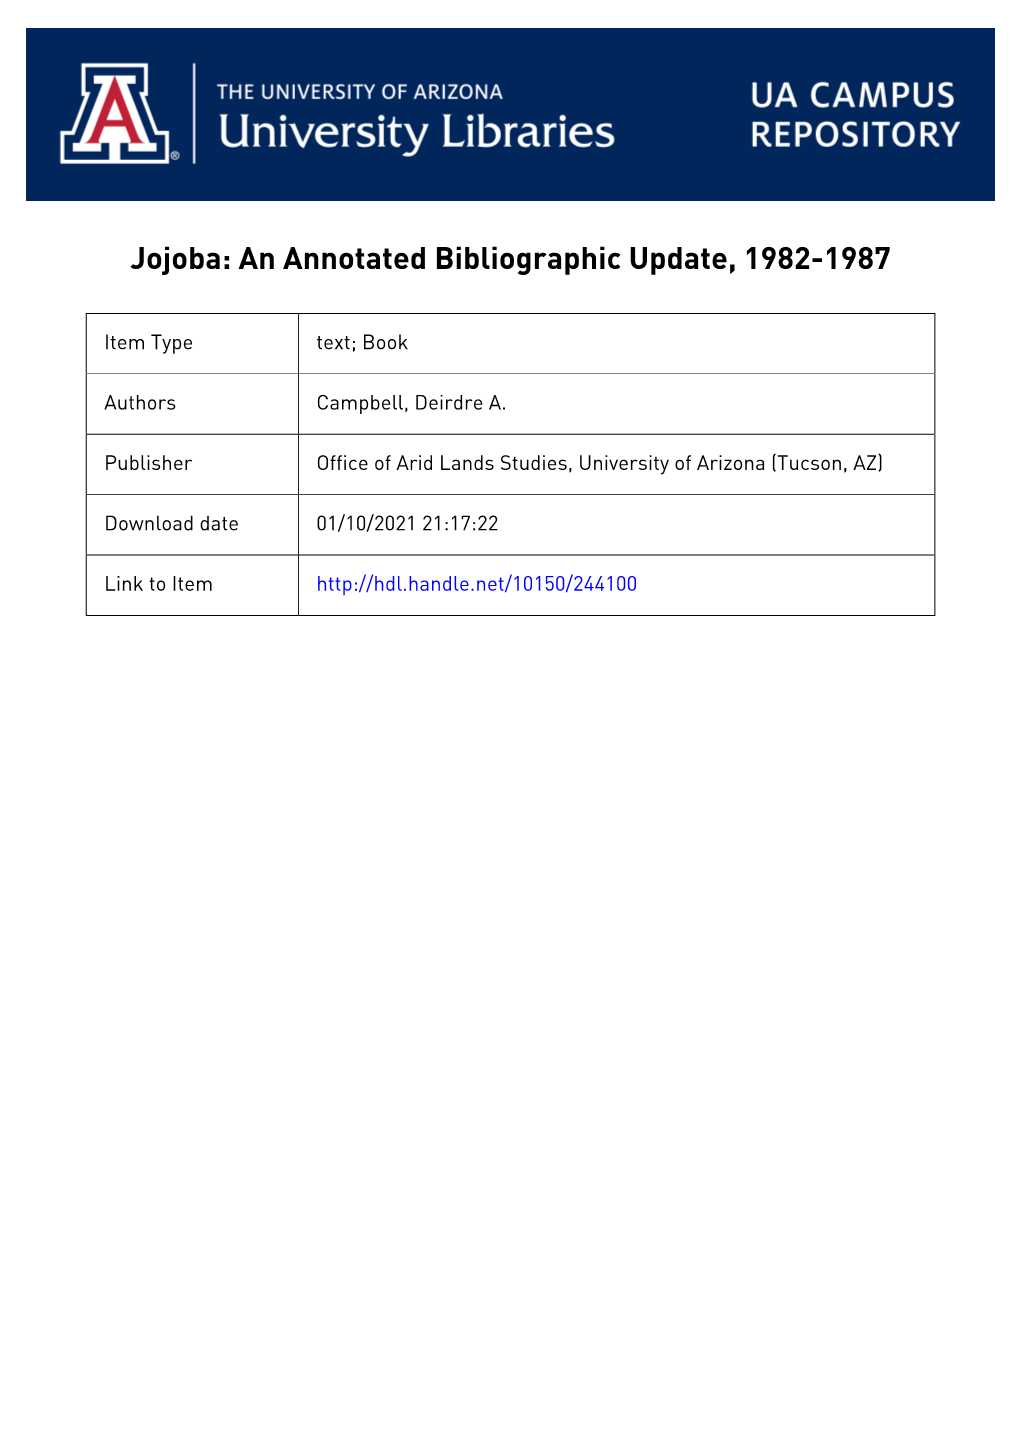 Annotated Bibliographic Update, 1982-1987